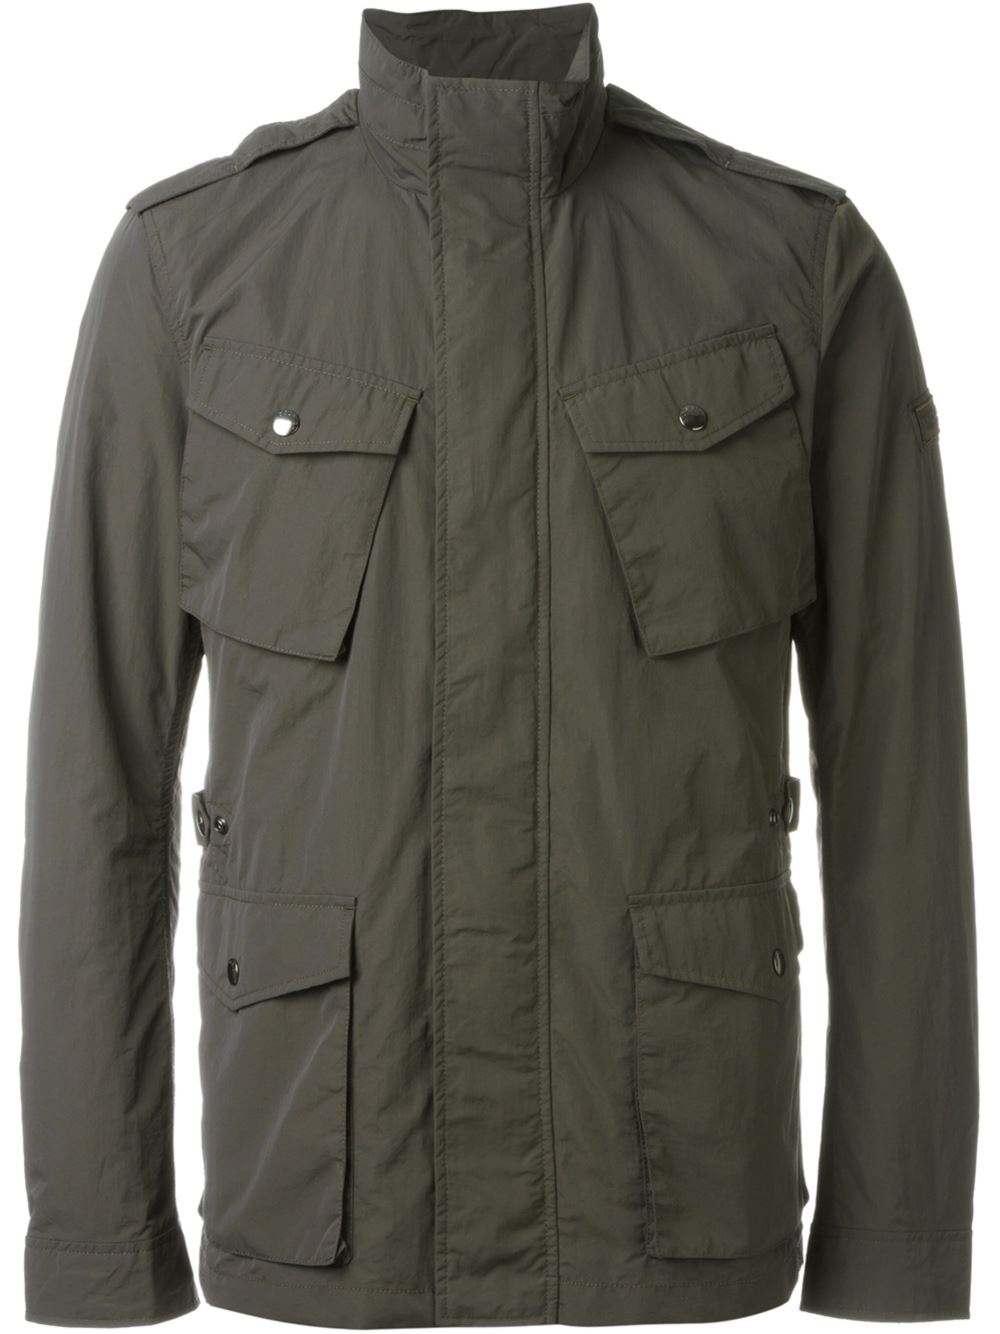 Lyst - Woolrich Military Jacket in Gray for Men